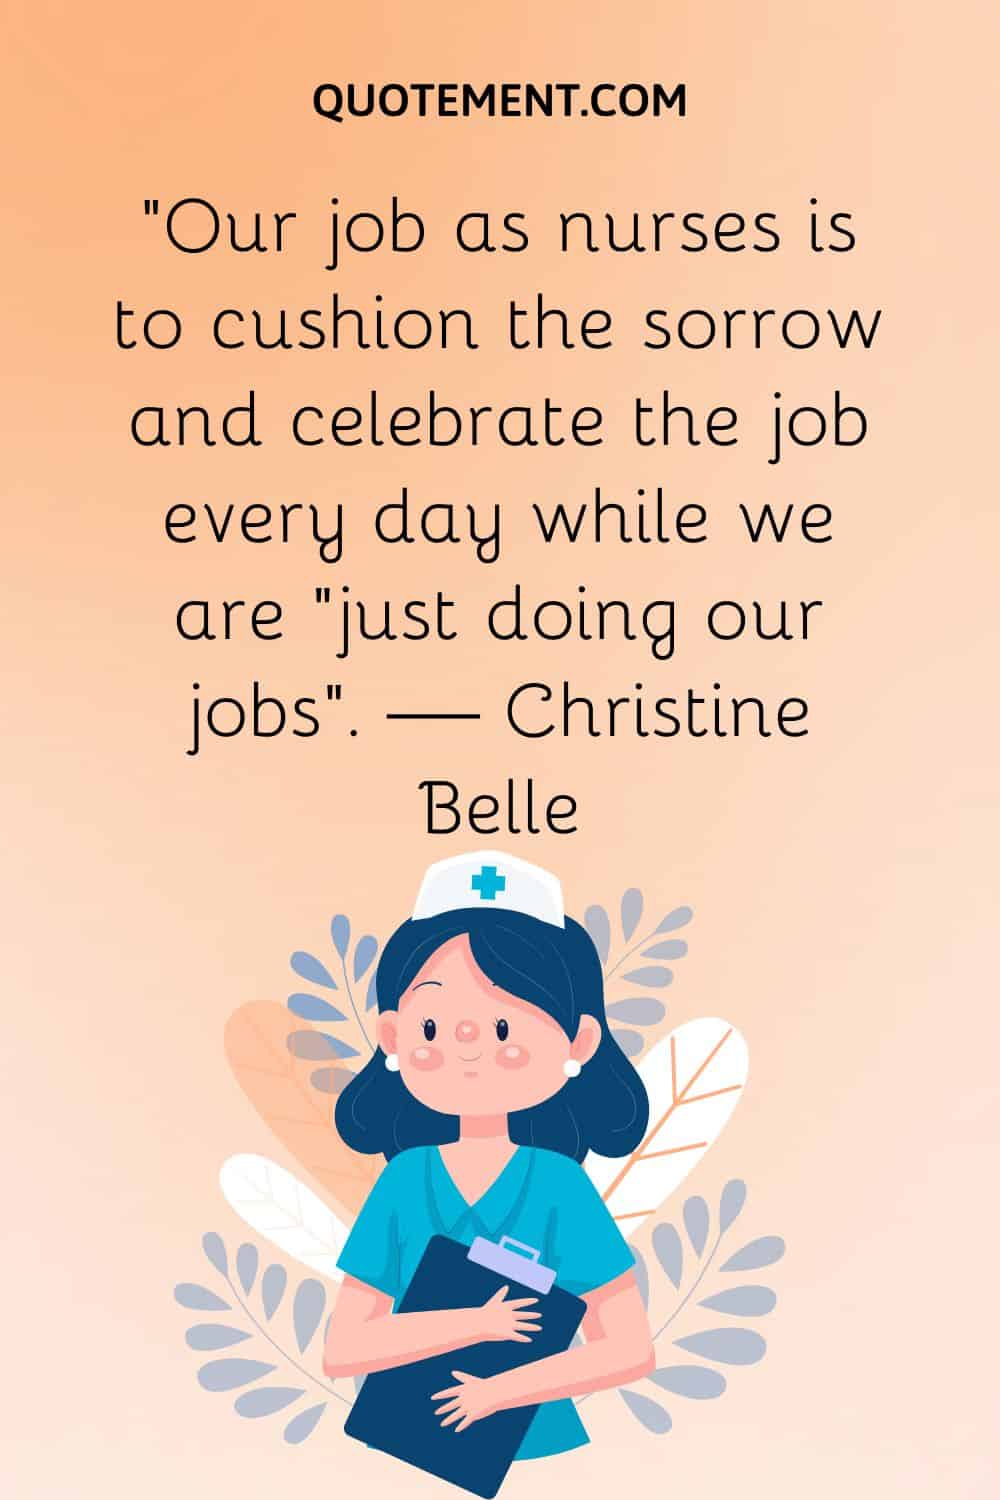 “Our job as nurses is to cushion the sorrow and celebrate the job every day while we are “just doing our jobs”. — Christine Belle